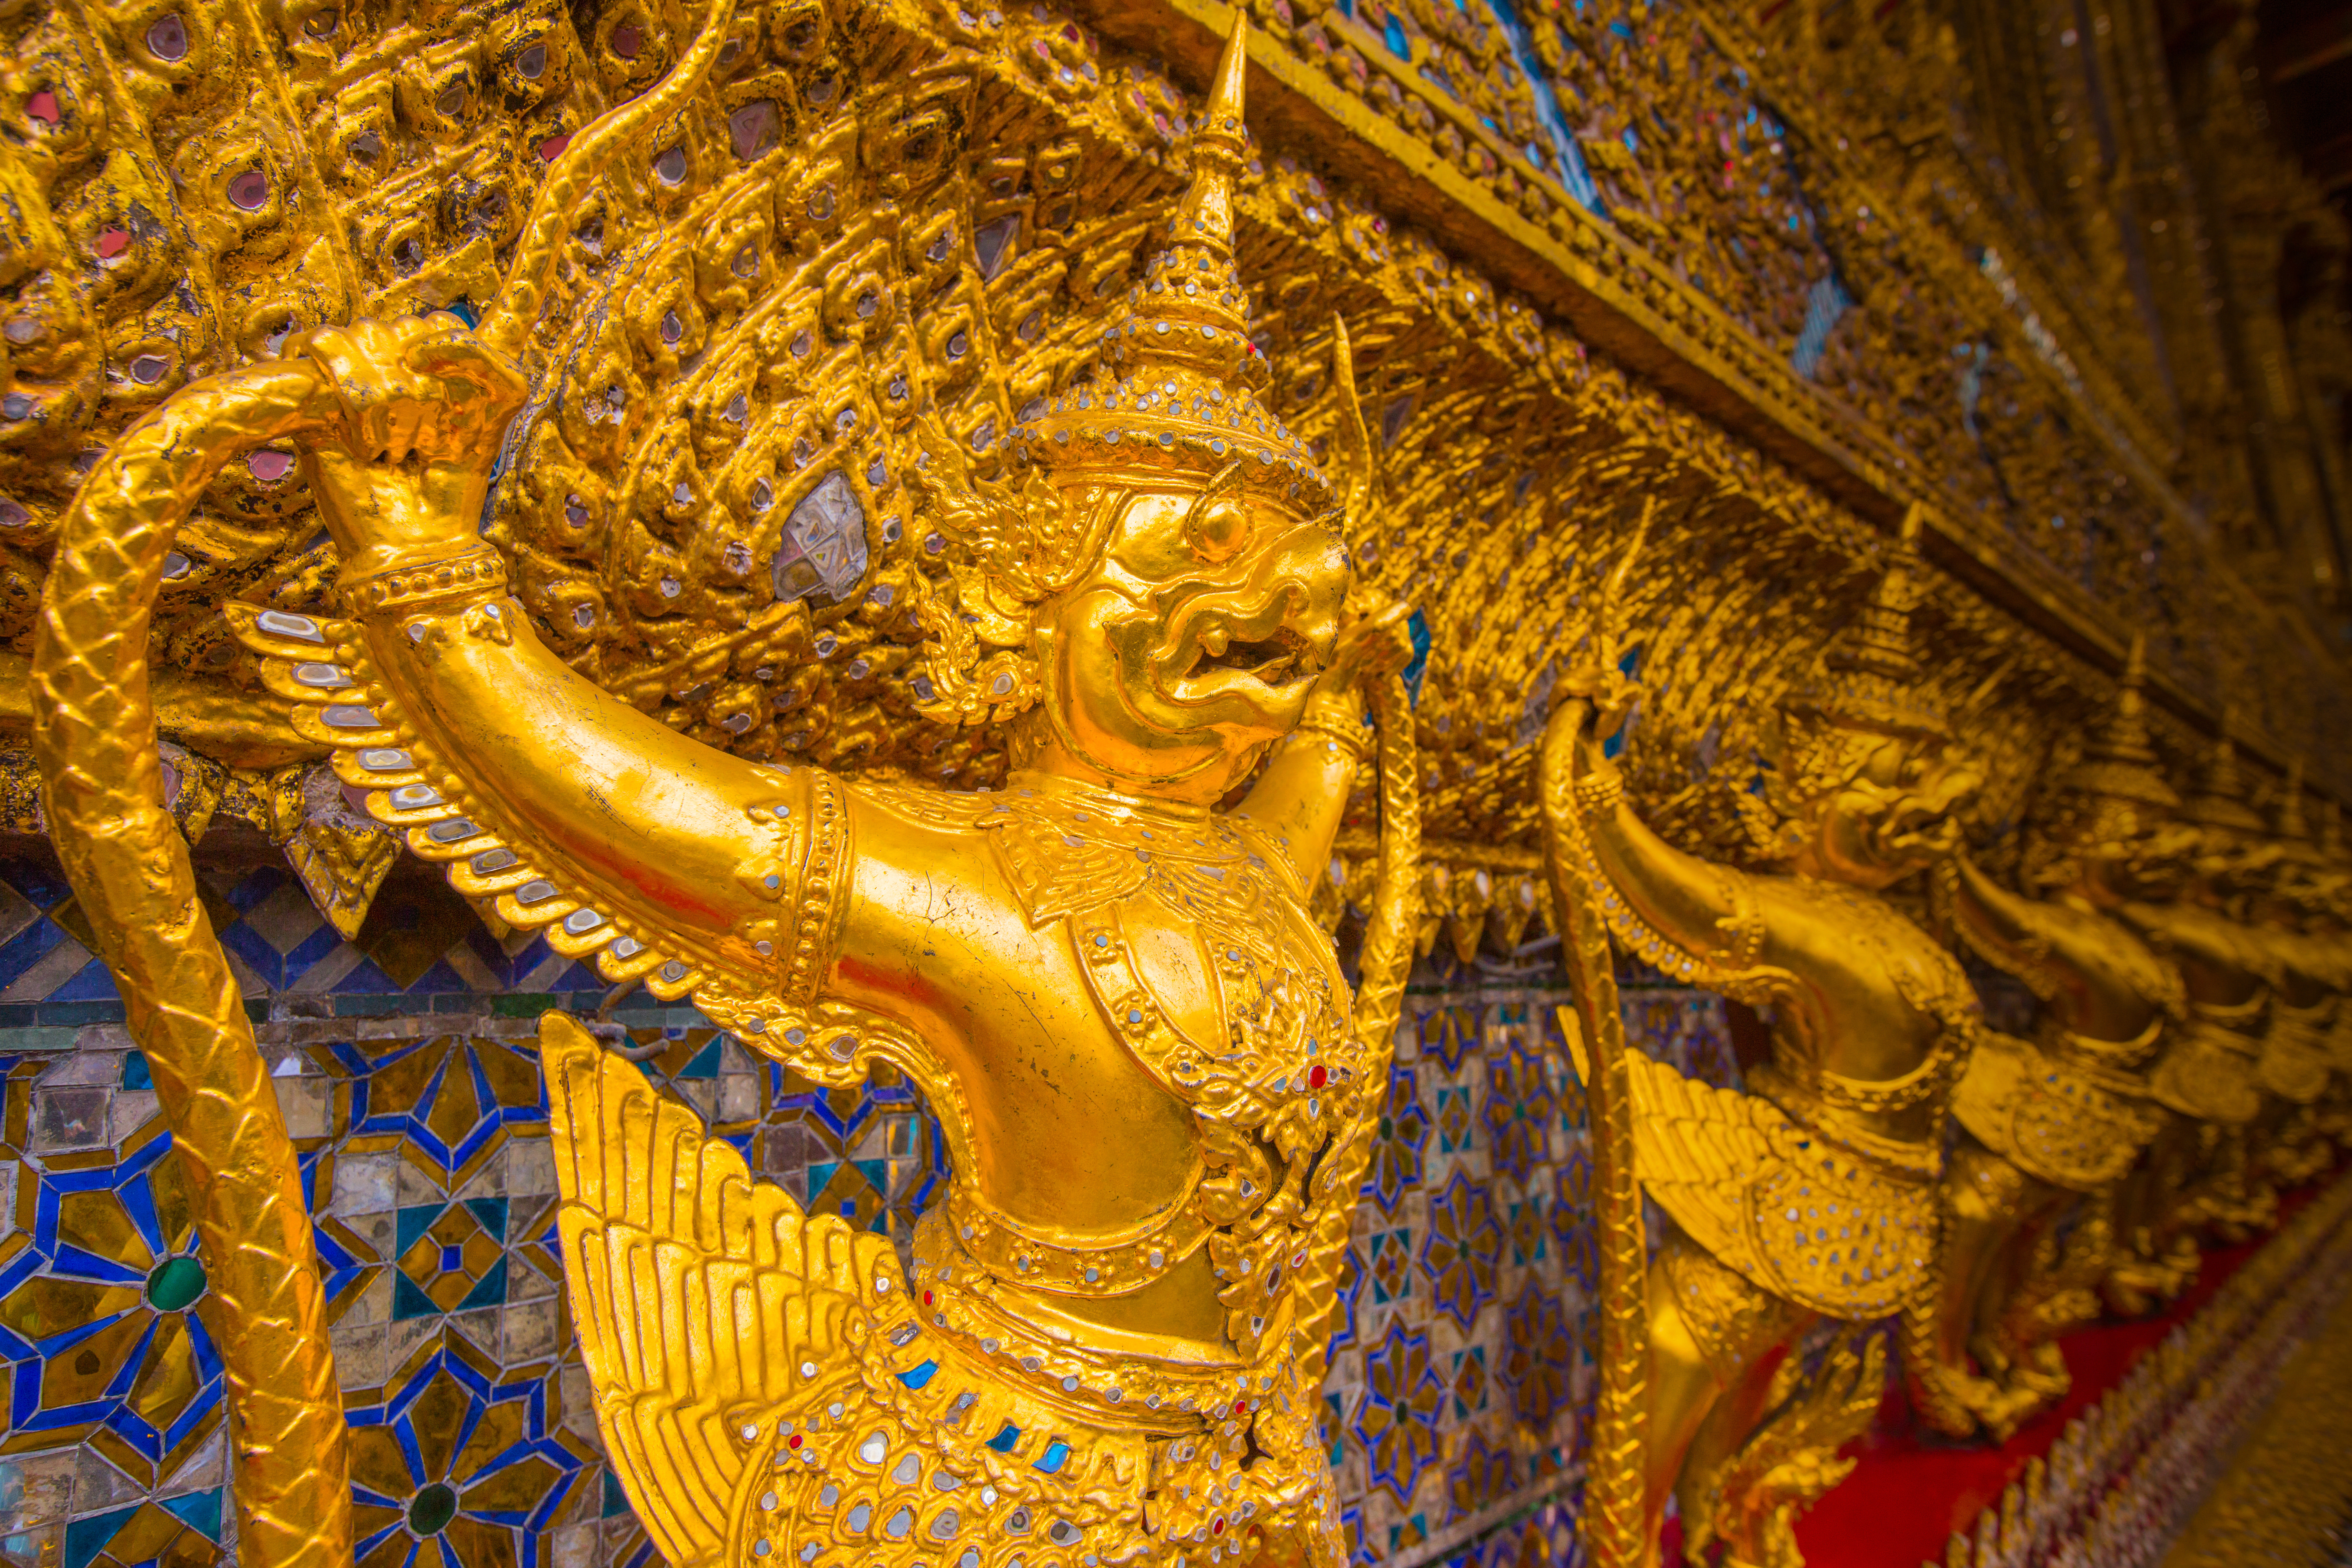 A row of ornate Buddhist carvings in gold inside Wat Phra Kaew, part of the Grand Palace in Bangkok.